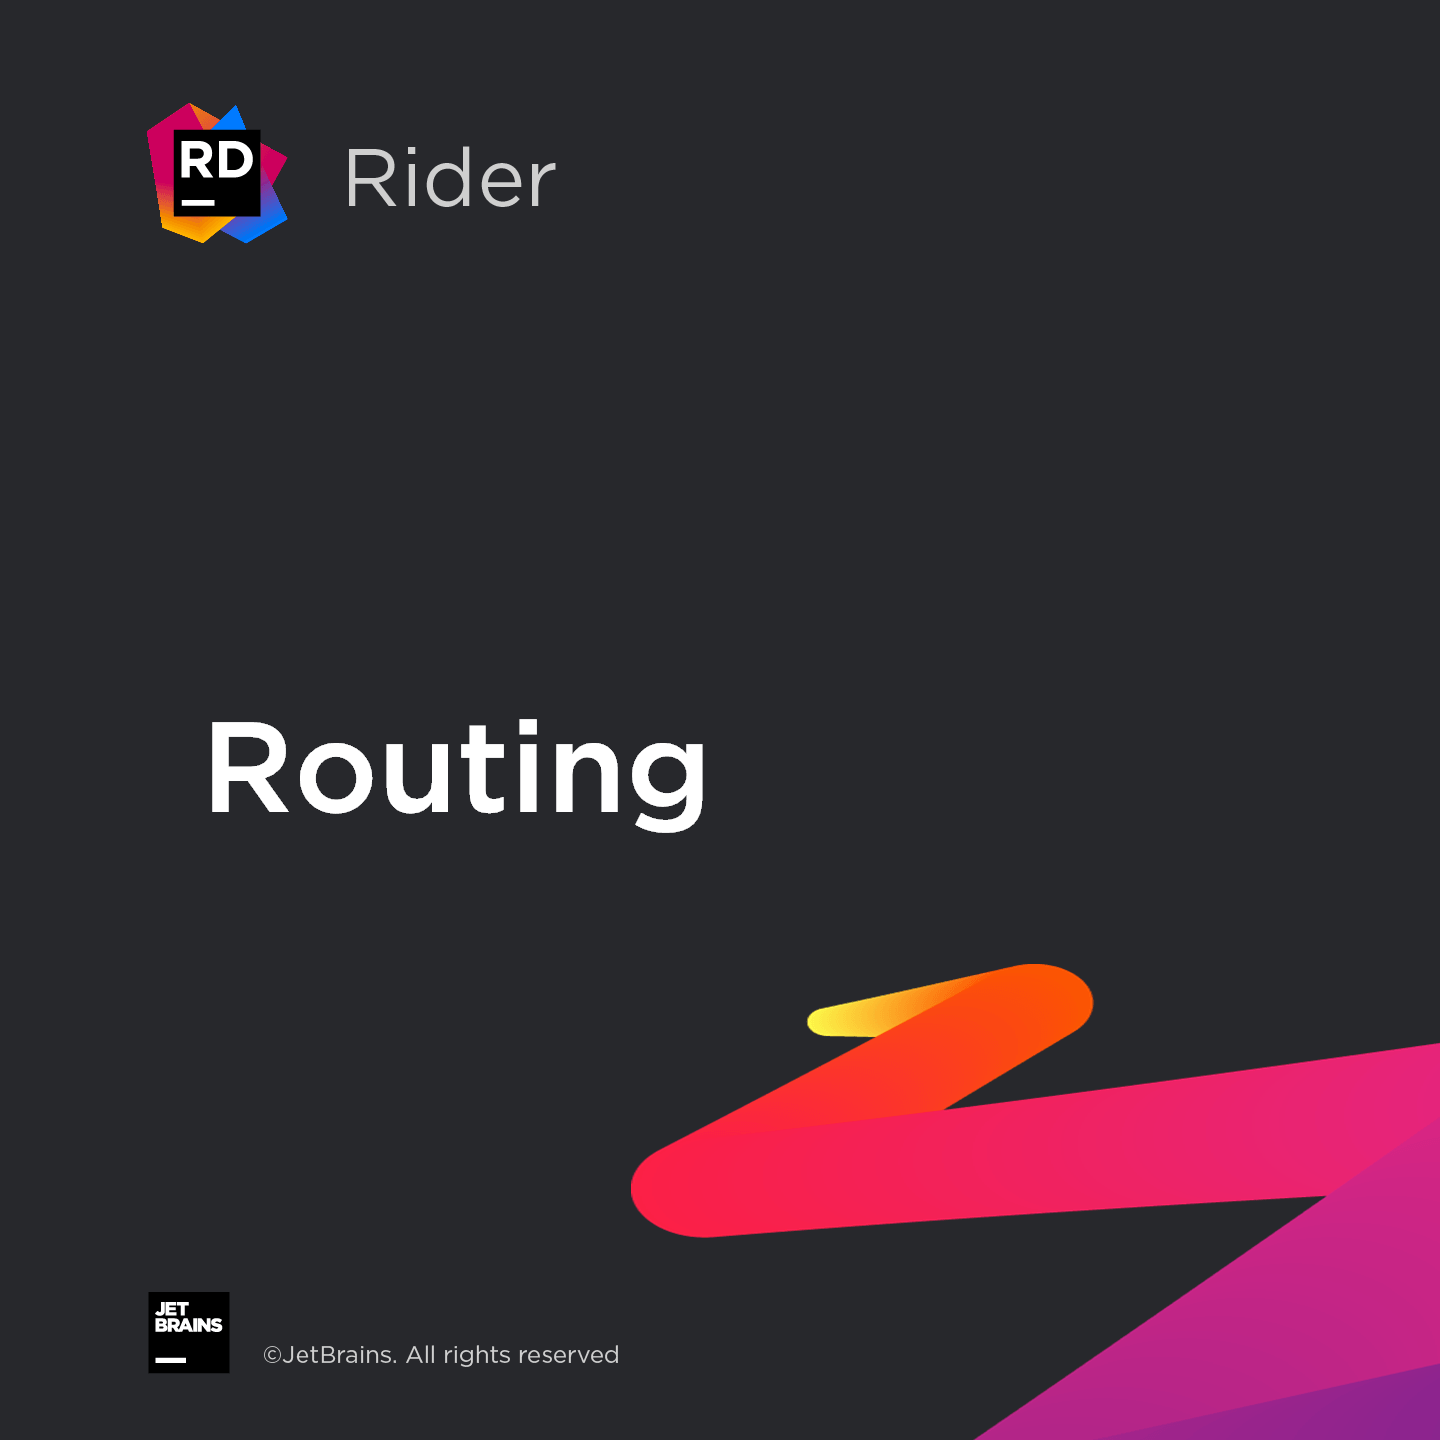 Routing